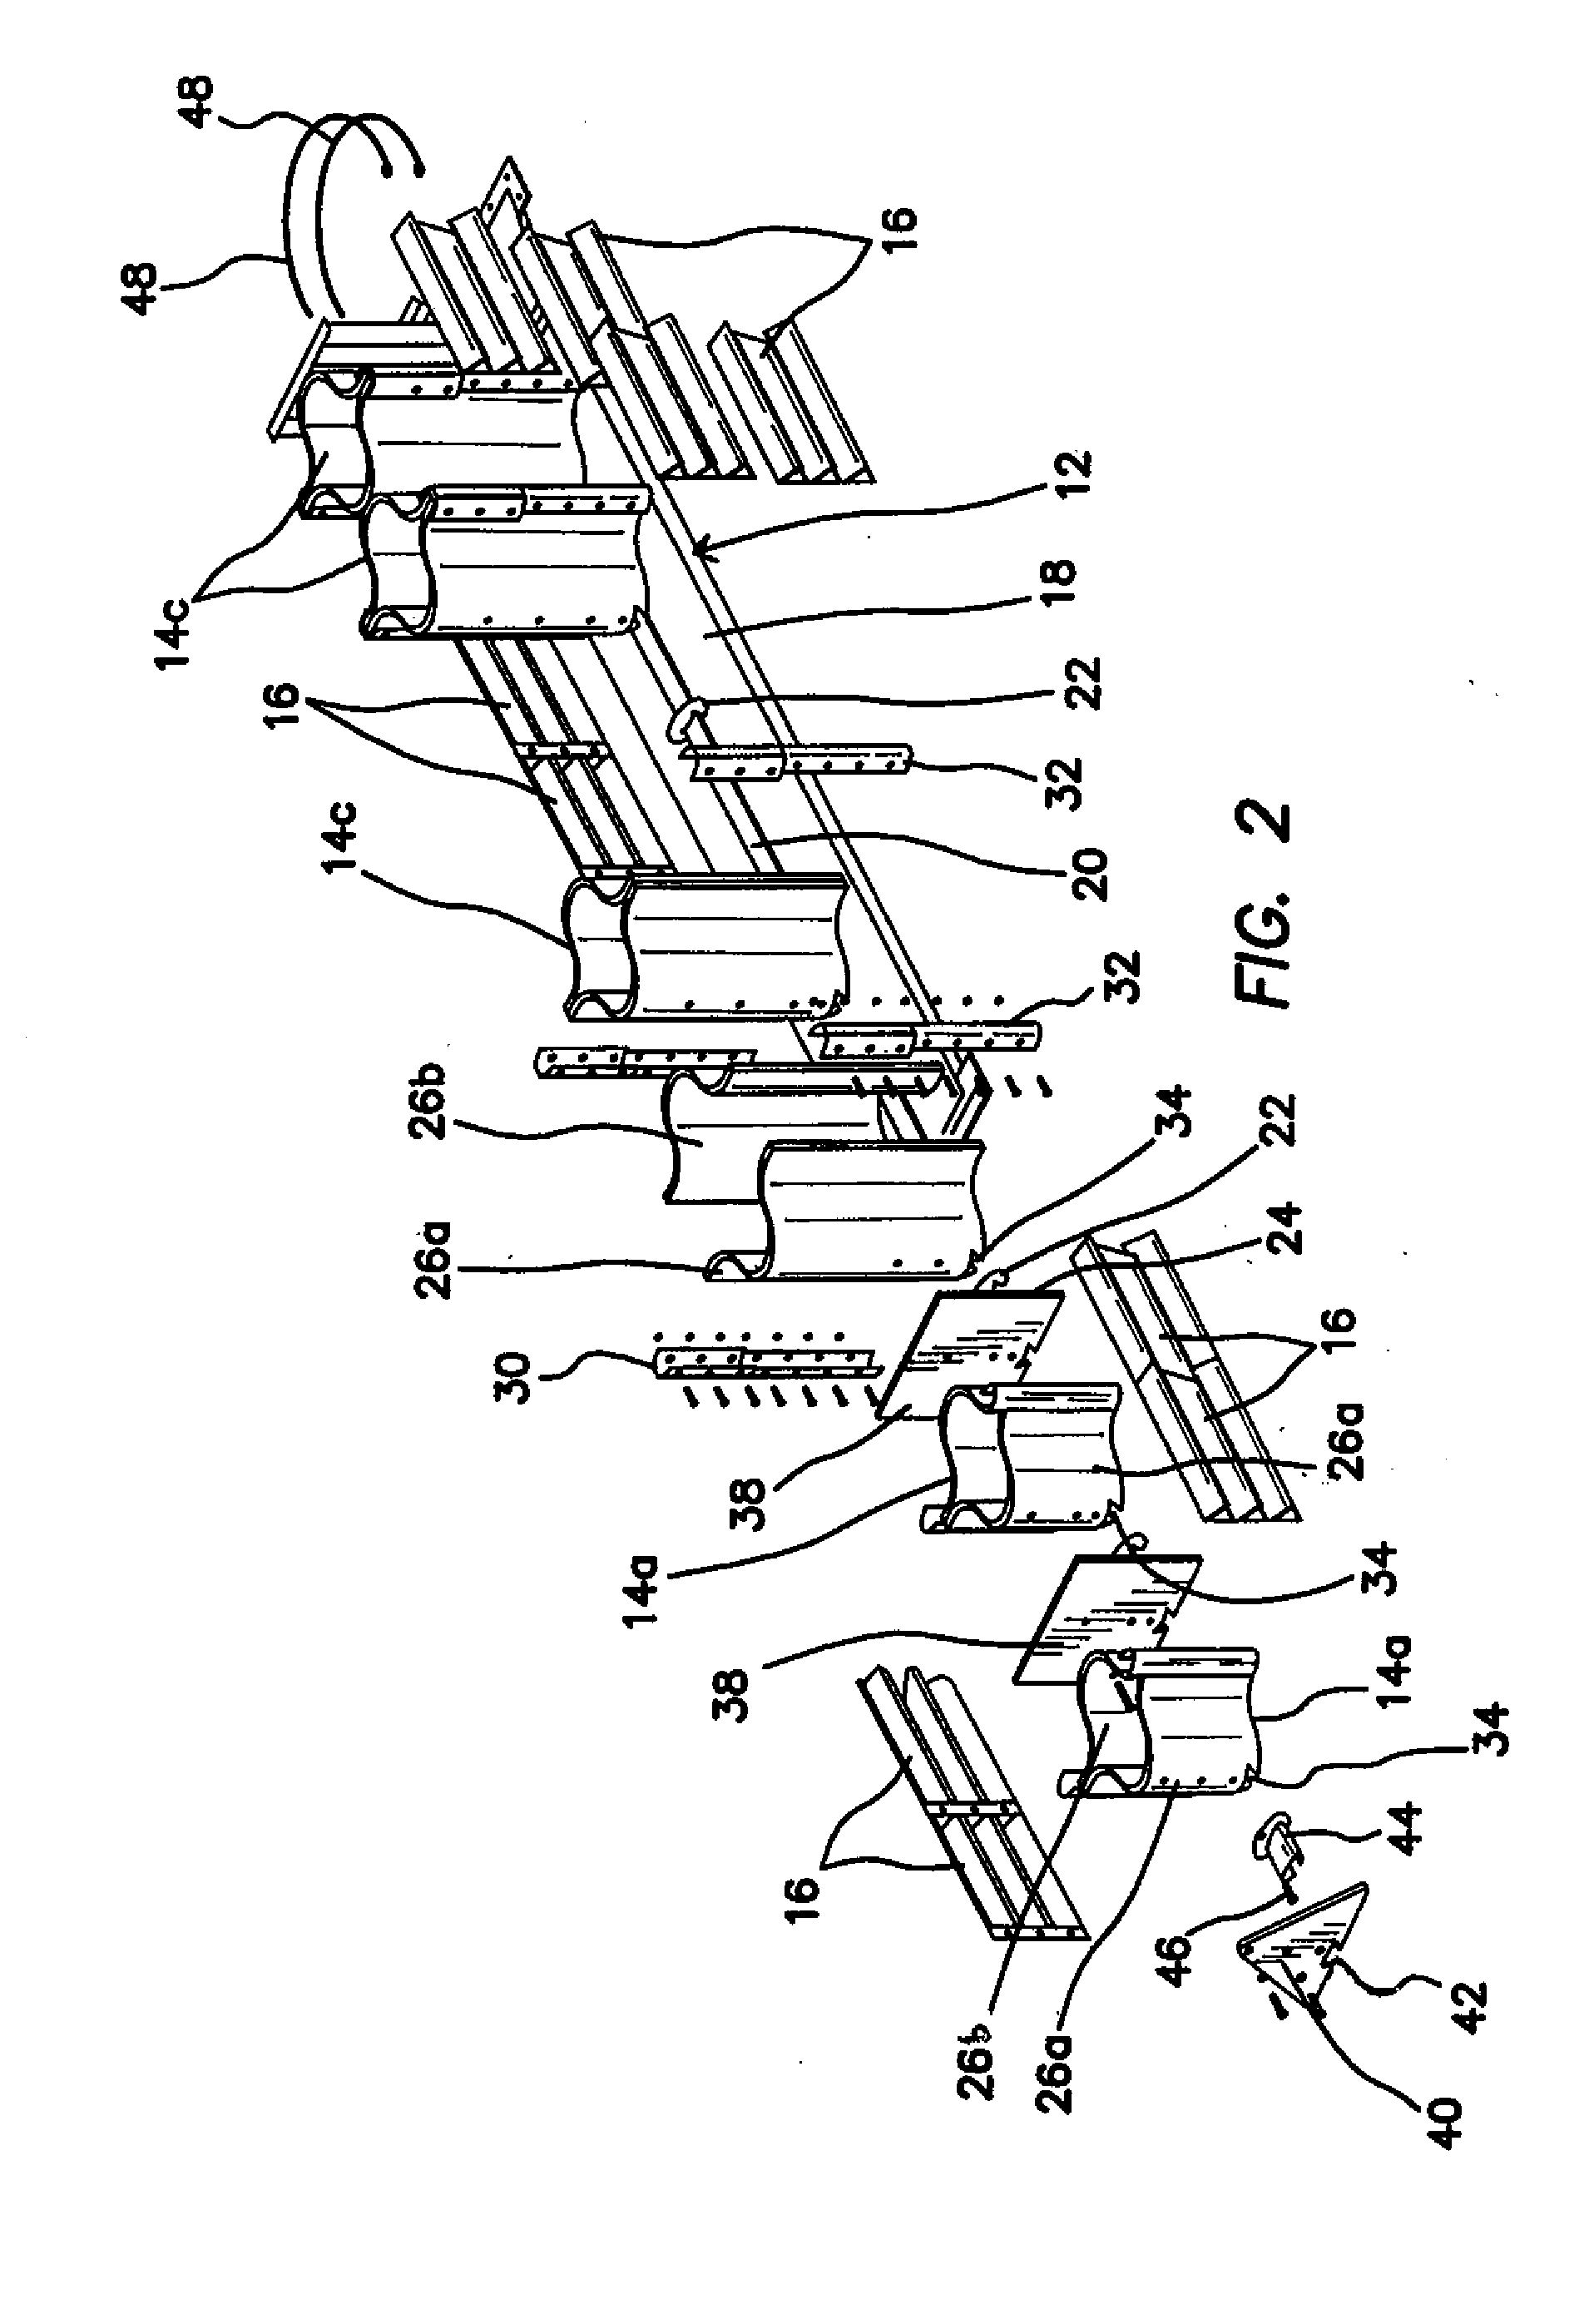 Crash impact attenuator systems and methods